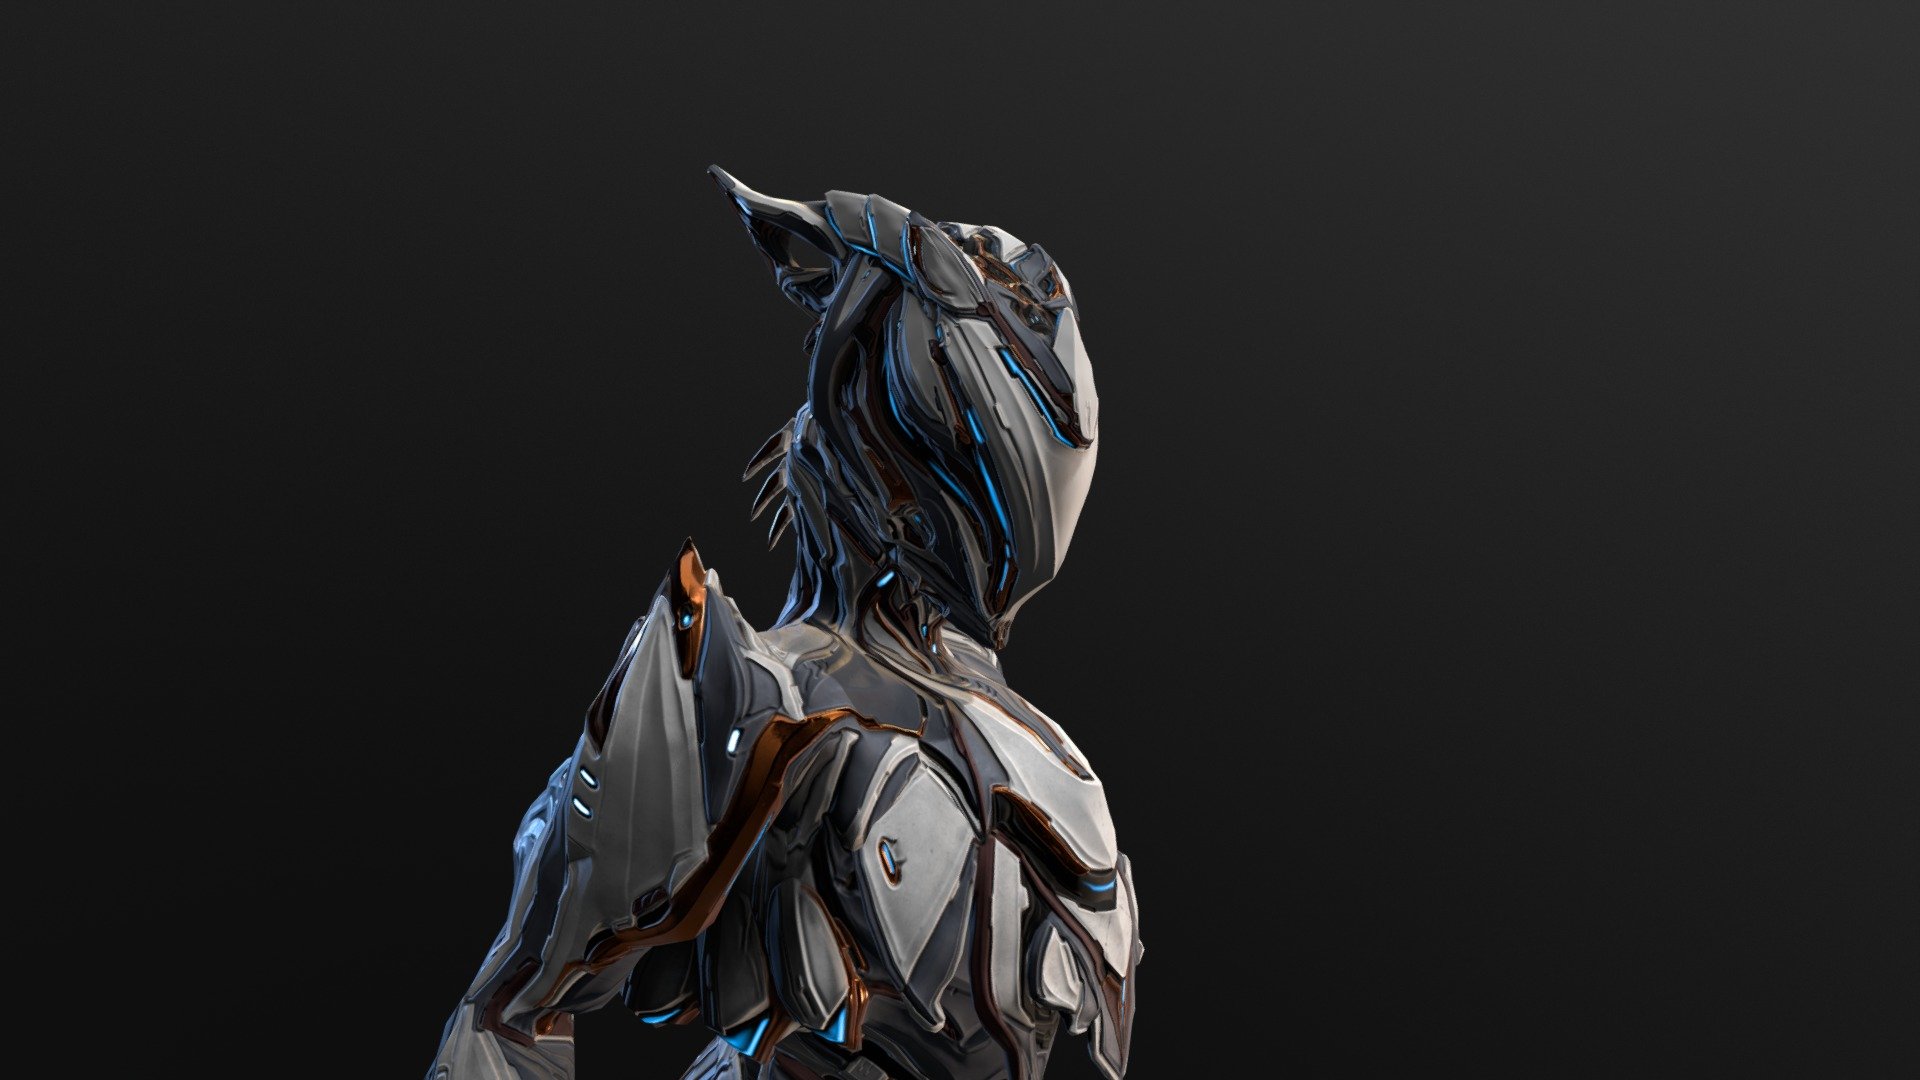 Skin and alt helmet for character Zephyr and model swap for Galatine(Heavy Blades). Original character and body mesh belongs to Digital Extremes - Strafe Zephyr Skin and alt helmet - 3D model by prosetisen 3d model